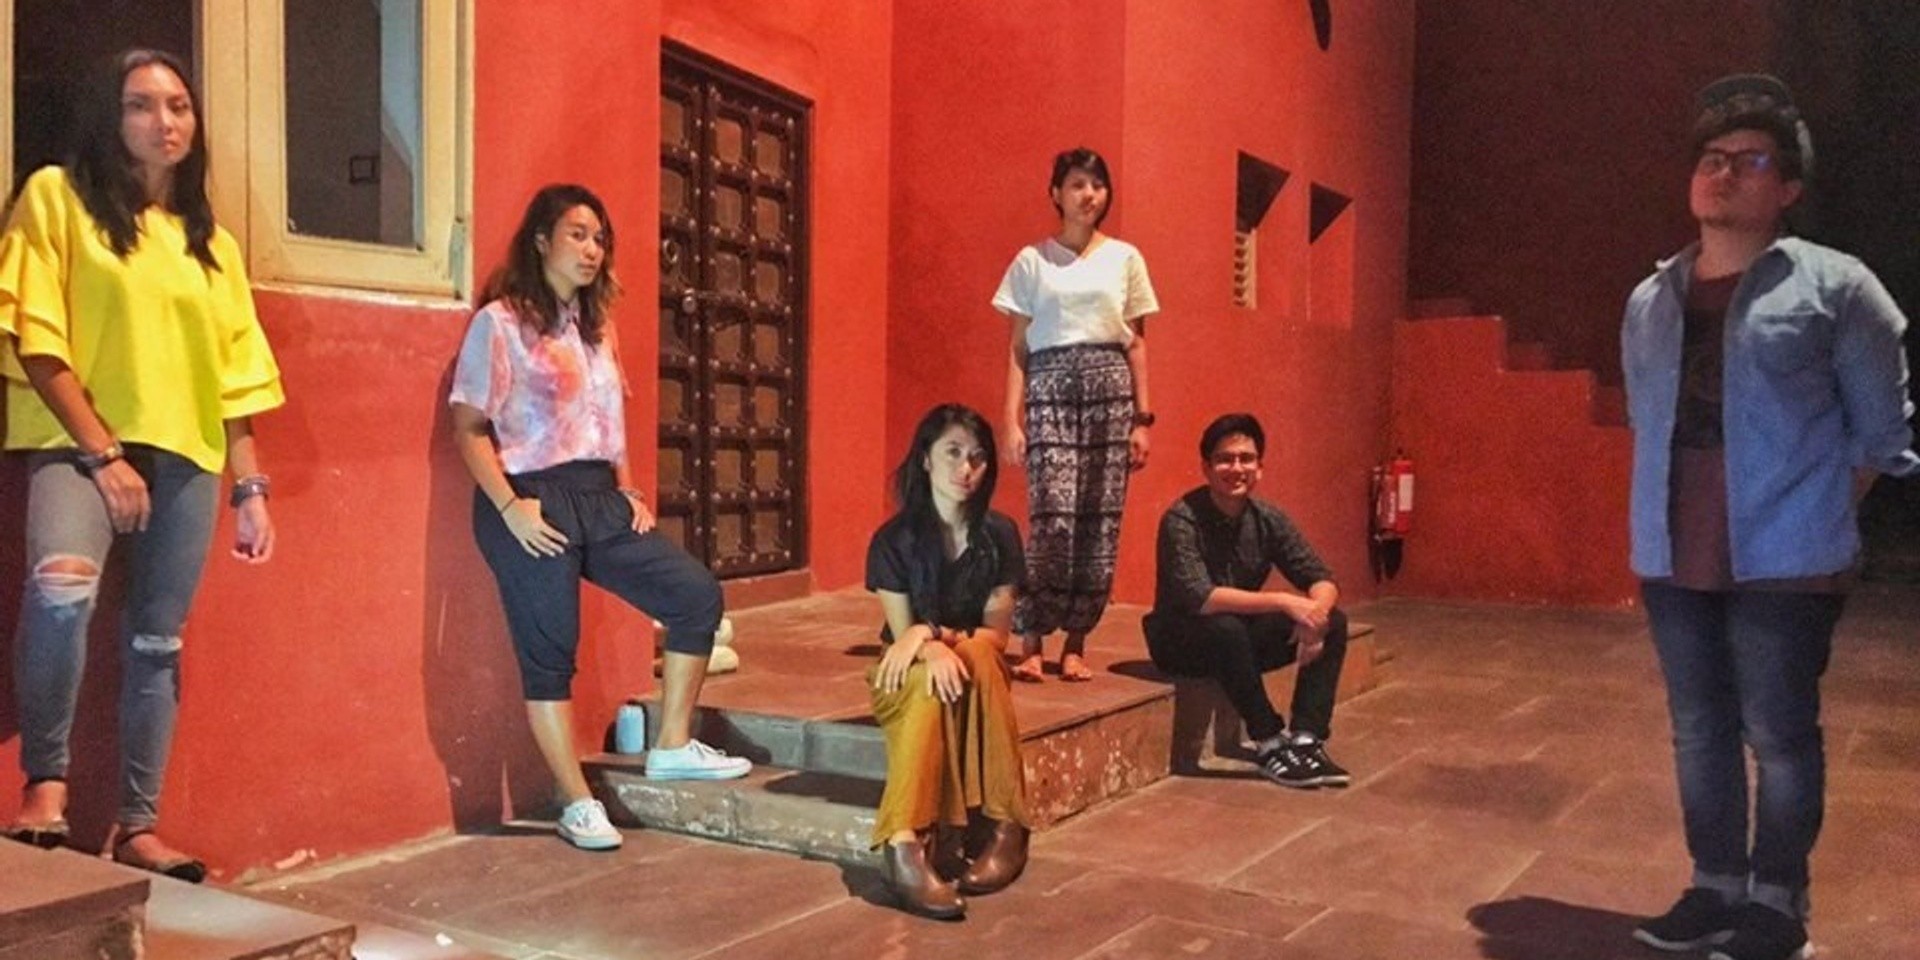 Watch The Ransom Collective perform Run on the streets of Jaipur